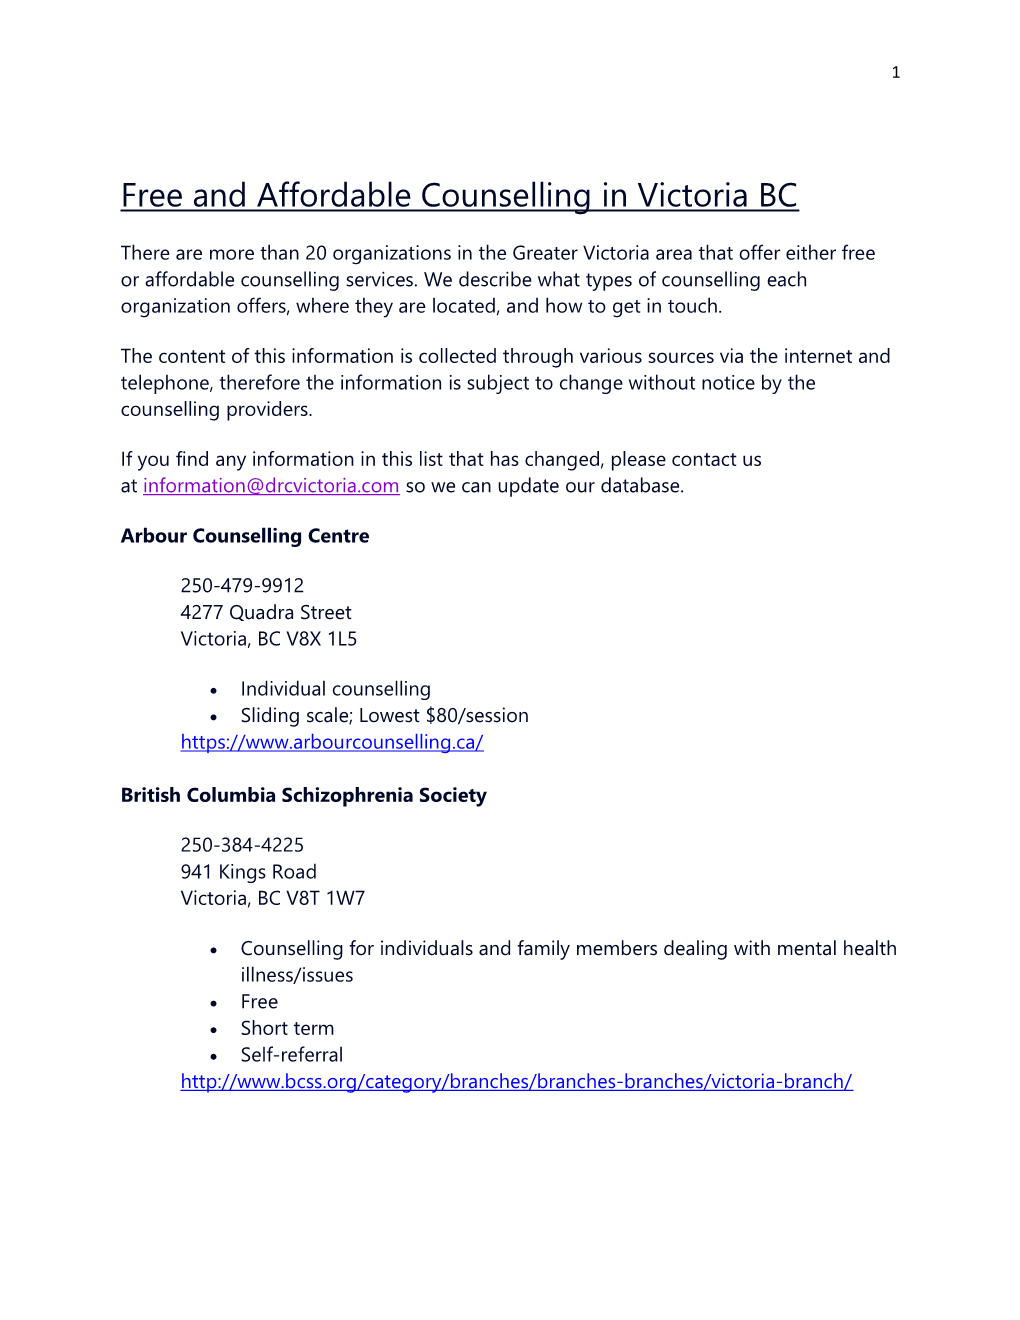 Free and Affordable Counselling in Victoria BC